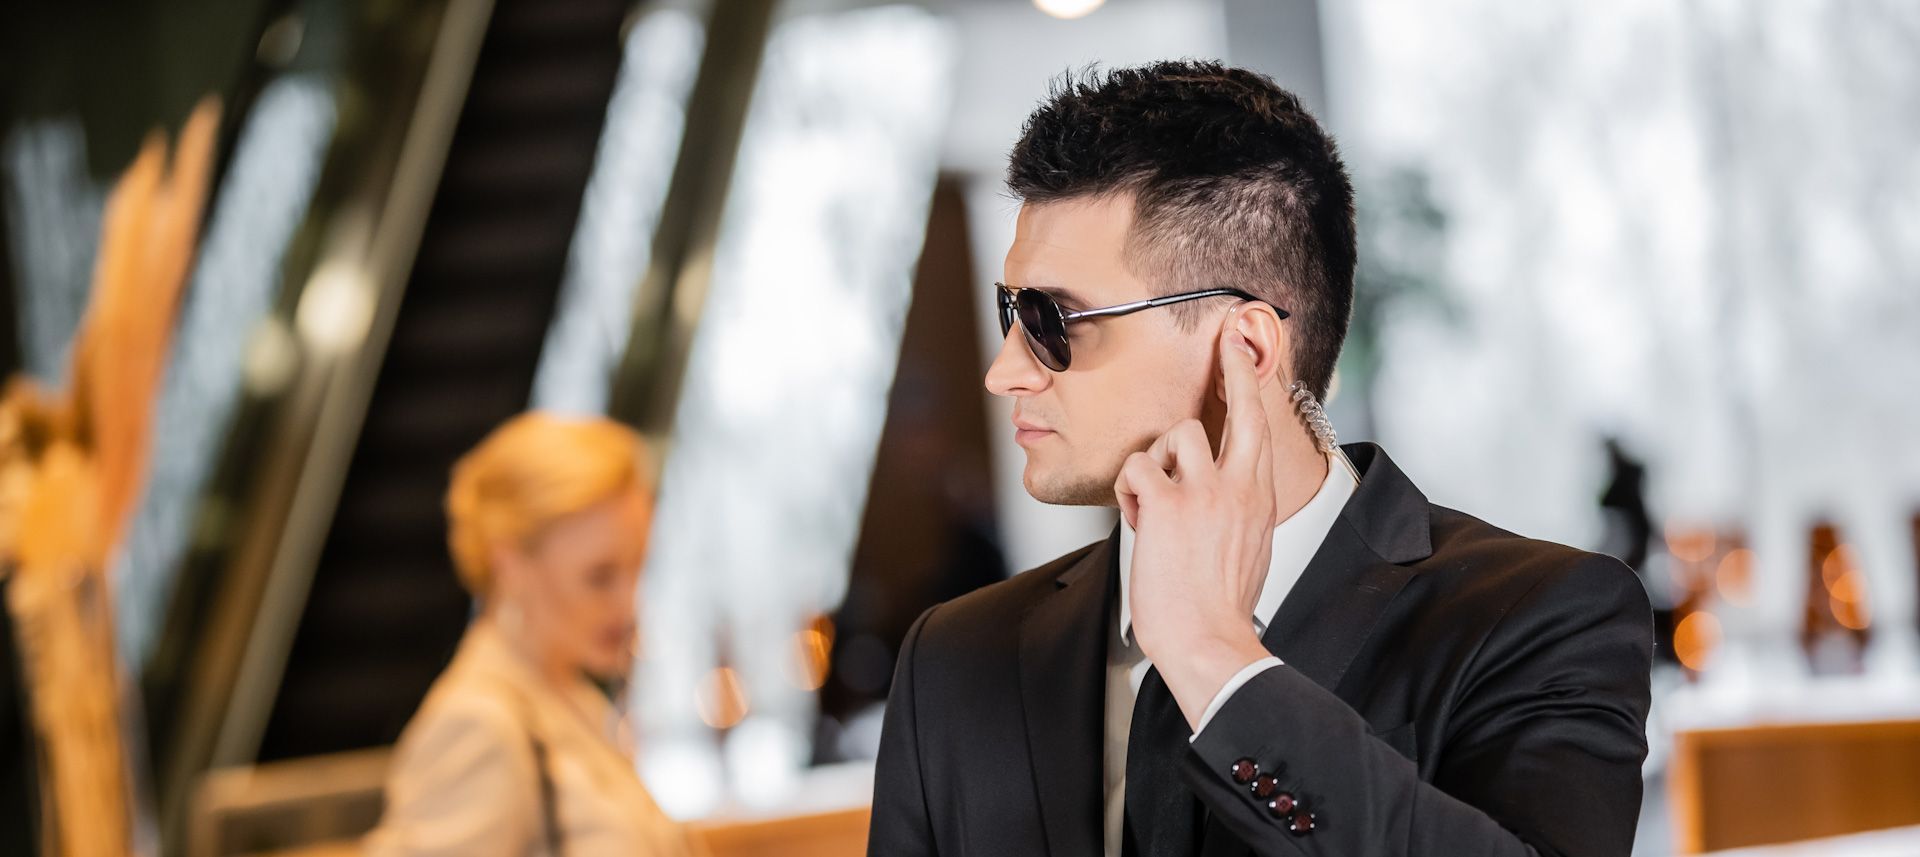 A man in a suit and sunglasses is talking on a cell phone.